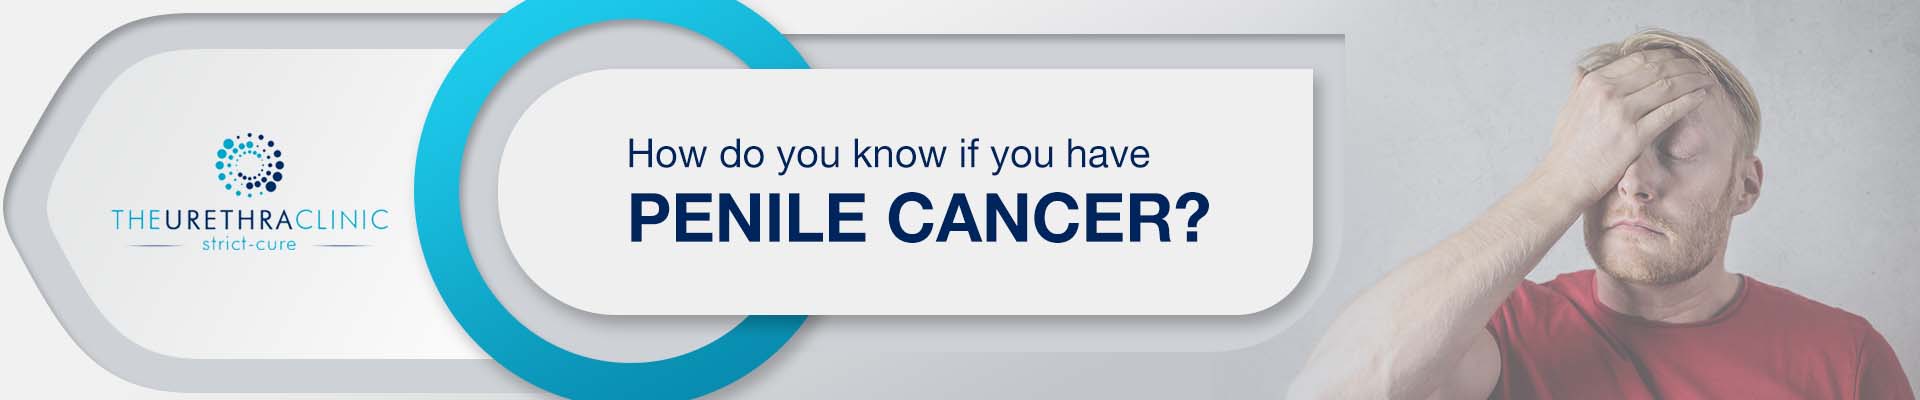 How To Know If You Have Penile Cancer